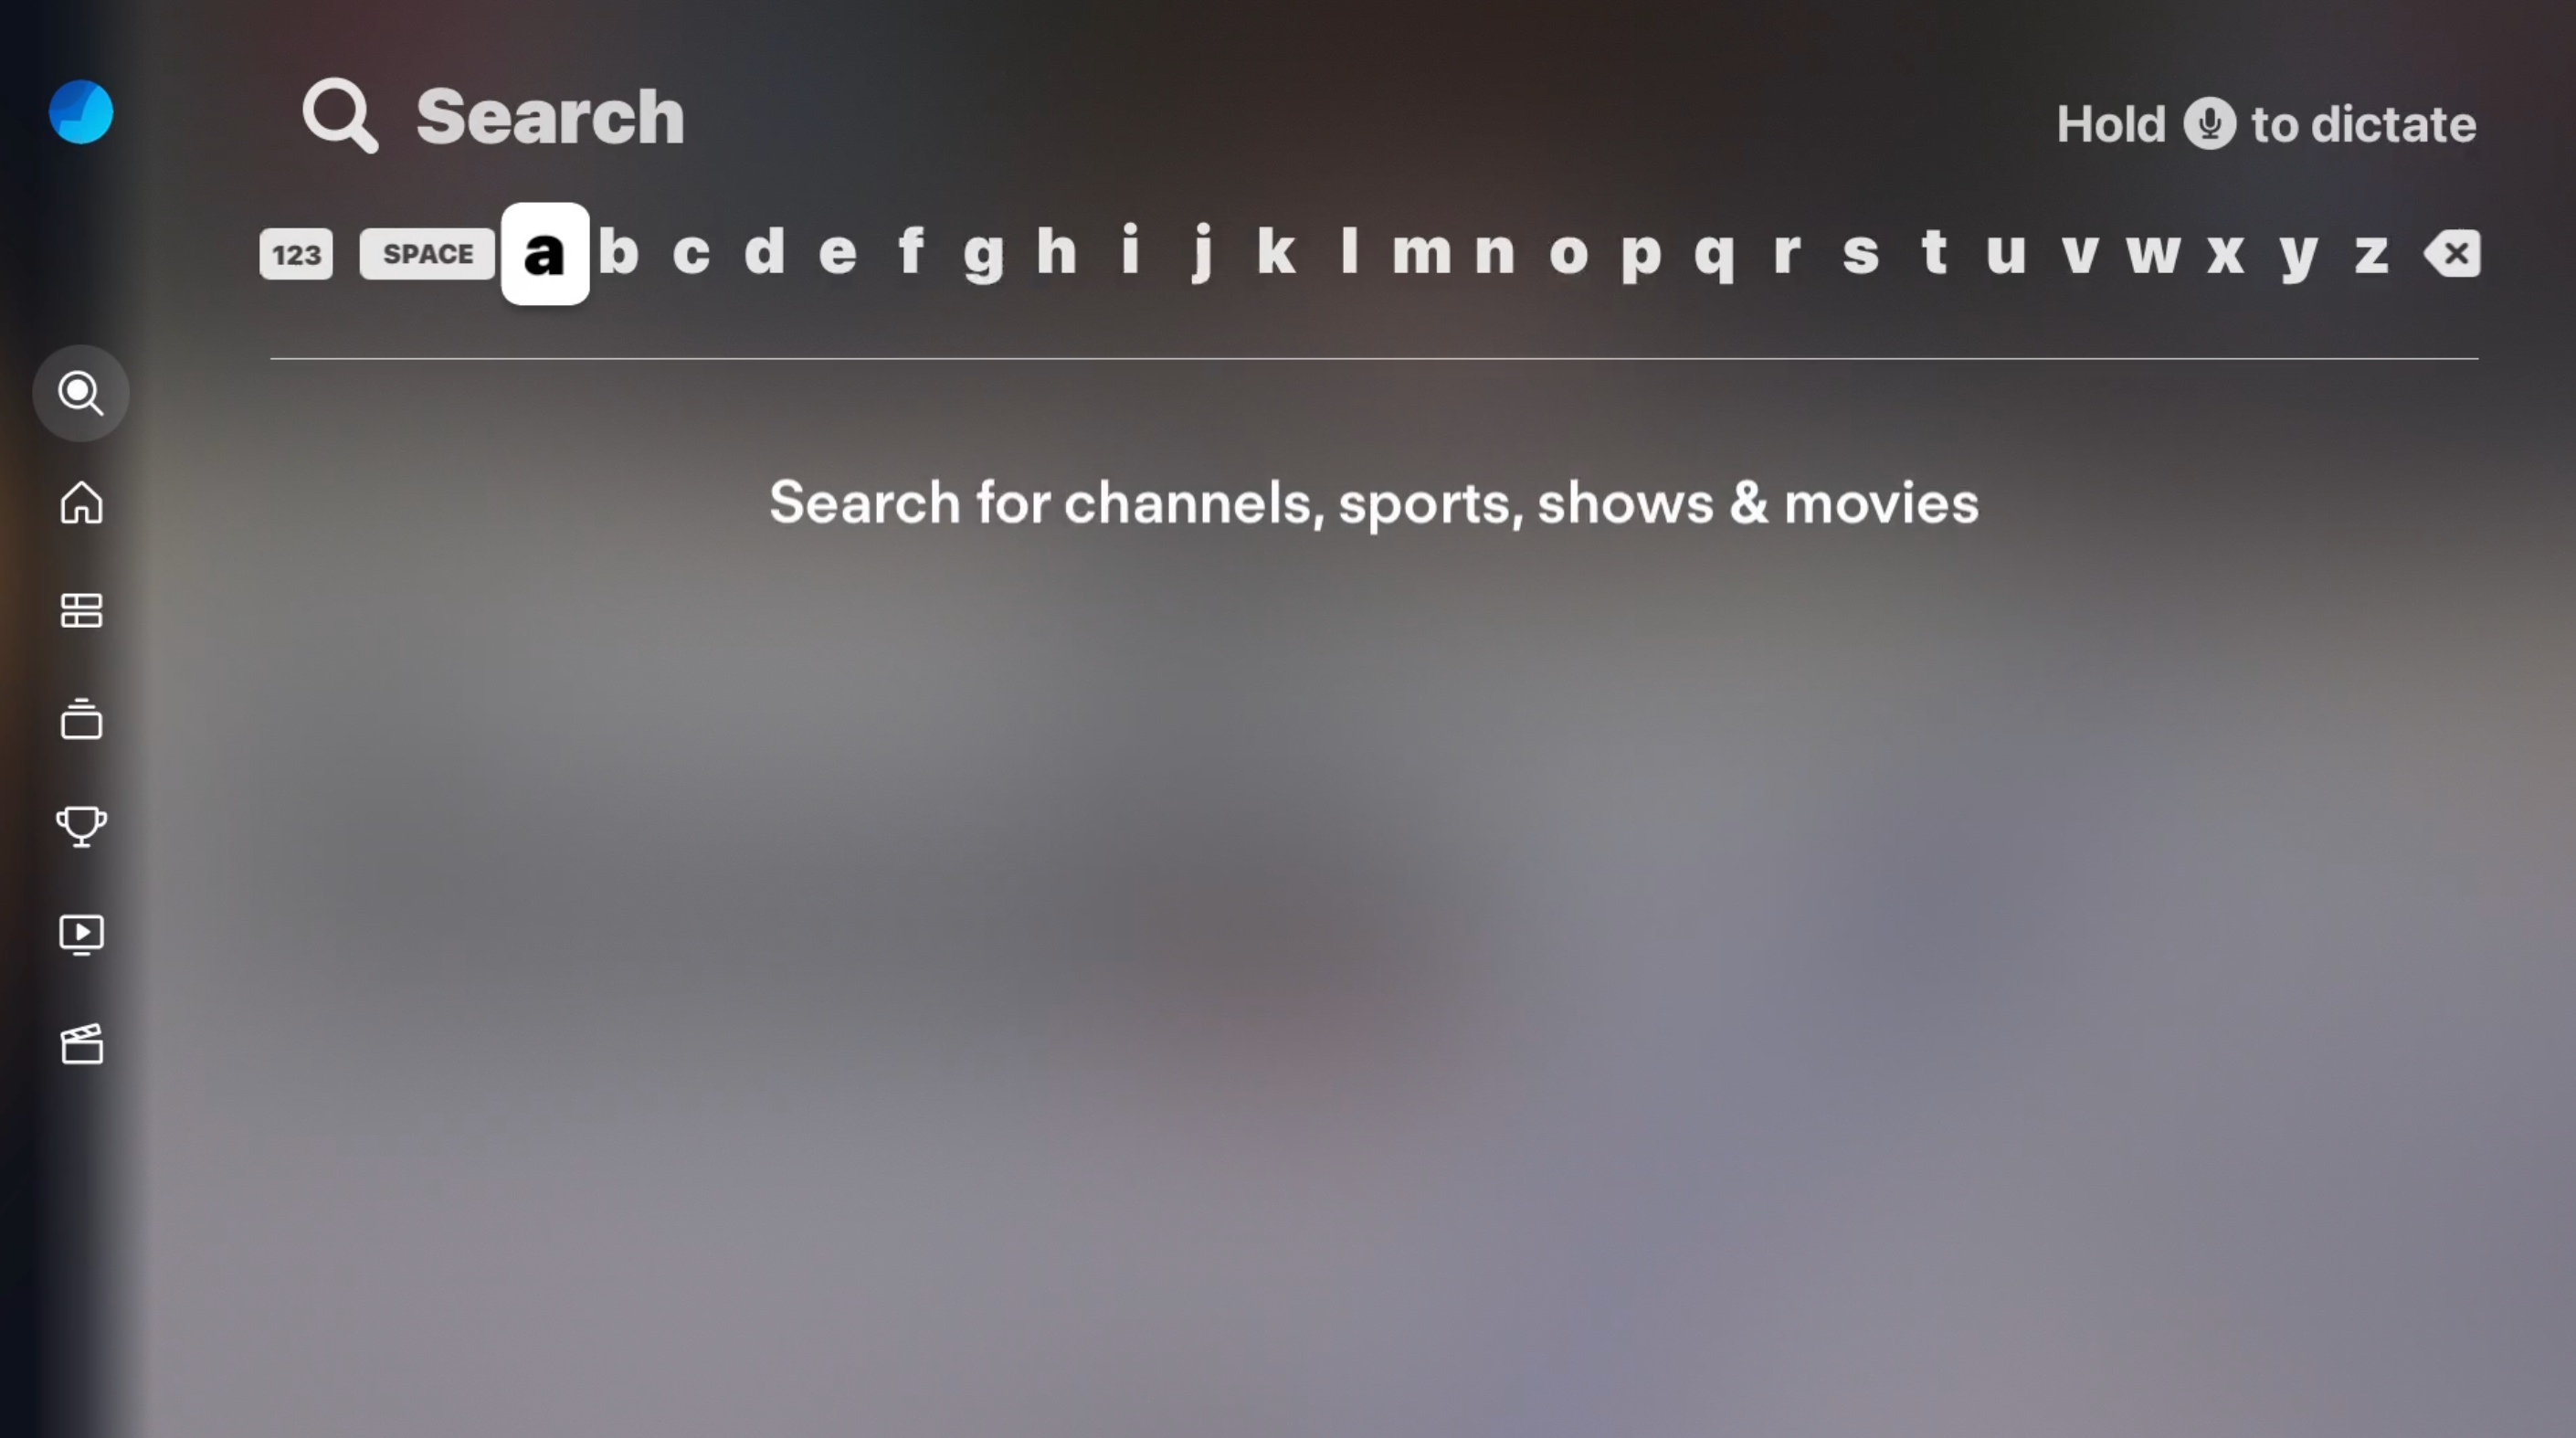 SEARCH screen of the FuboTV app on Apple TV with on-screen keyboard; enter text or use voice search